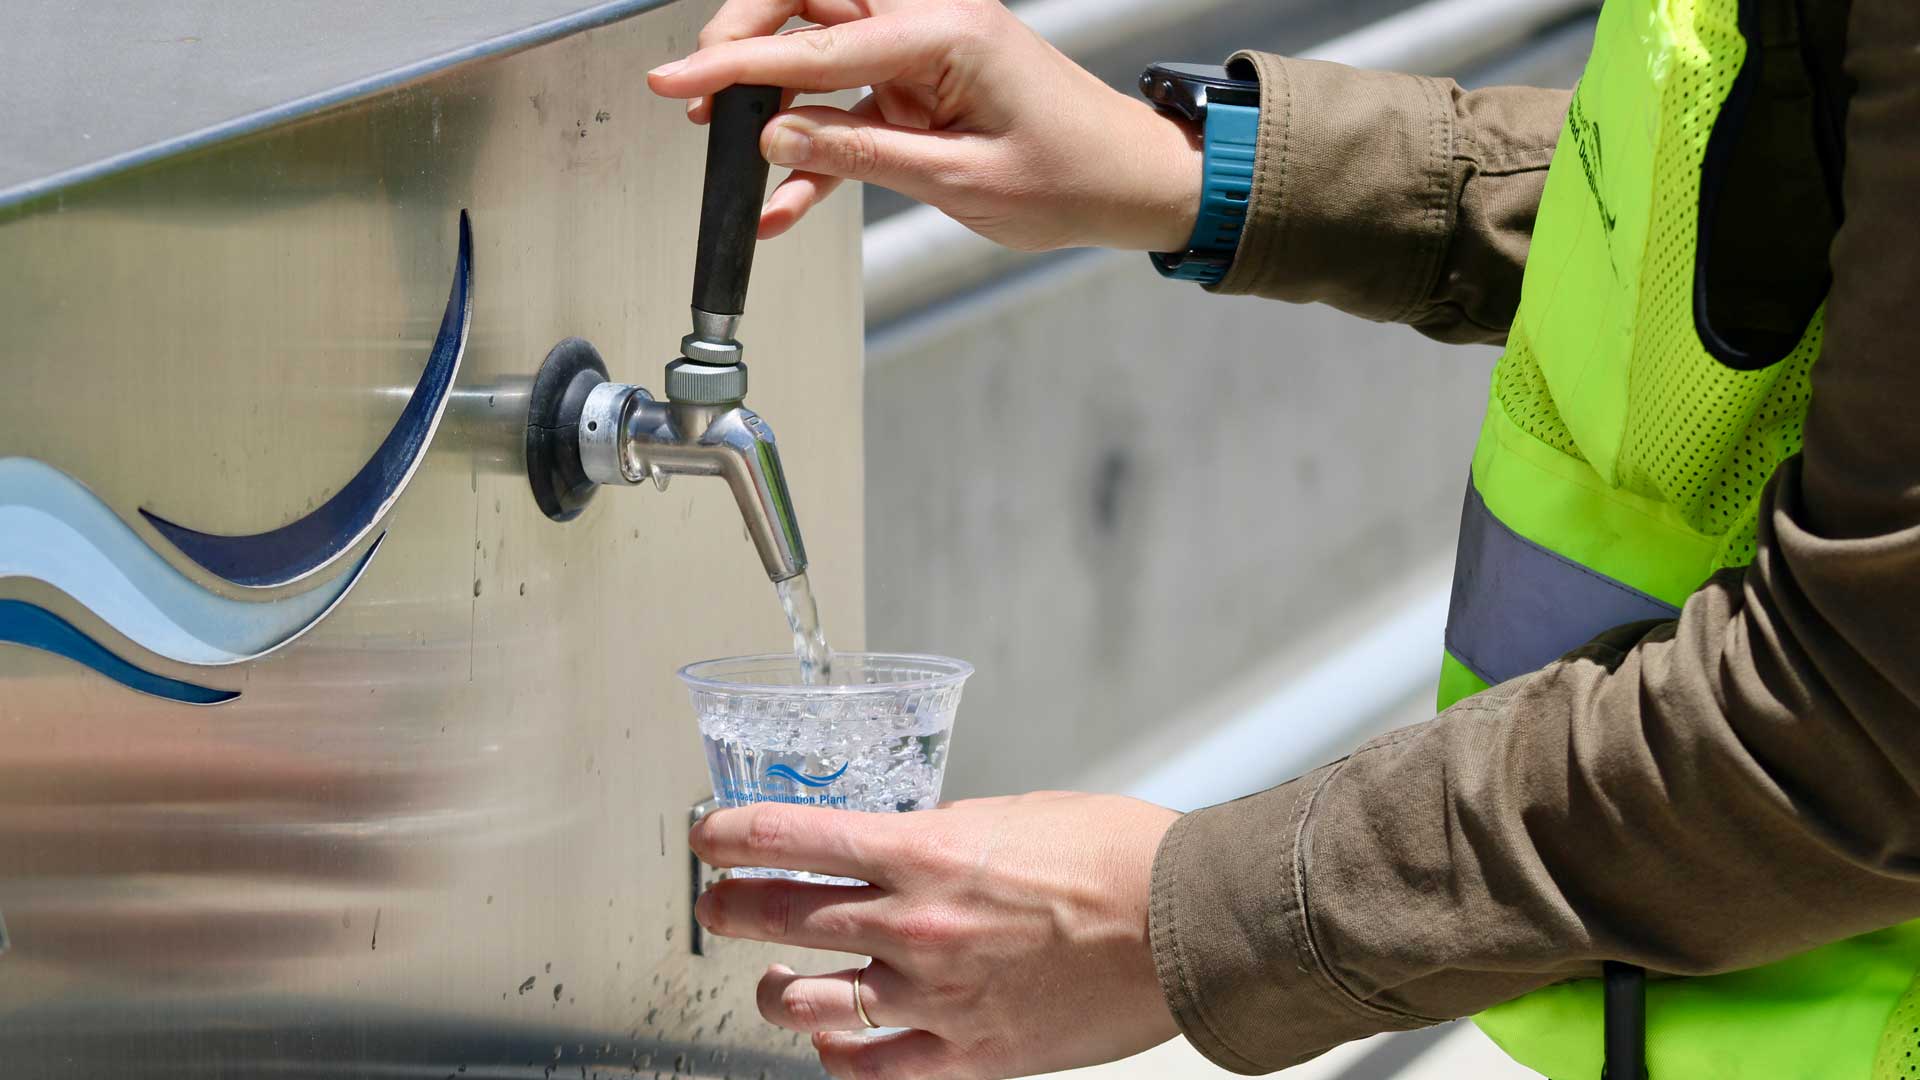 Michelle Peters fills a glass with freshly desalinated ocean water at Poseidon Water's Carlsbad plant. Using reverse osmosis, the facility creates about 10% of San Diego County's freshwater supply.
